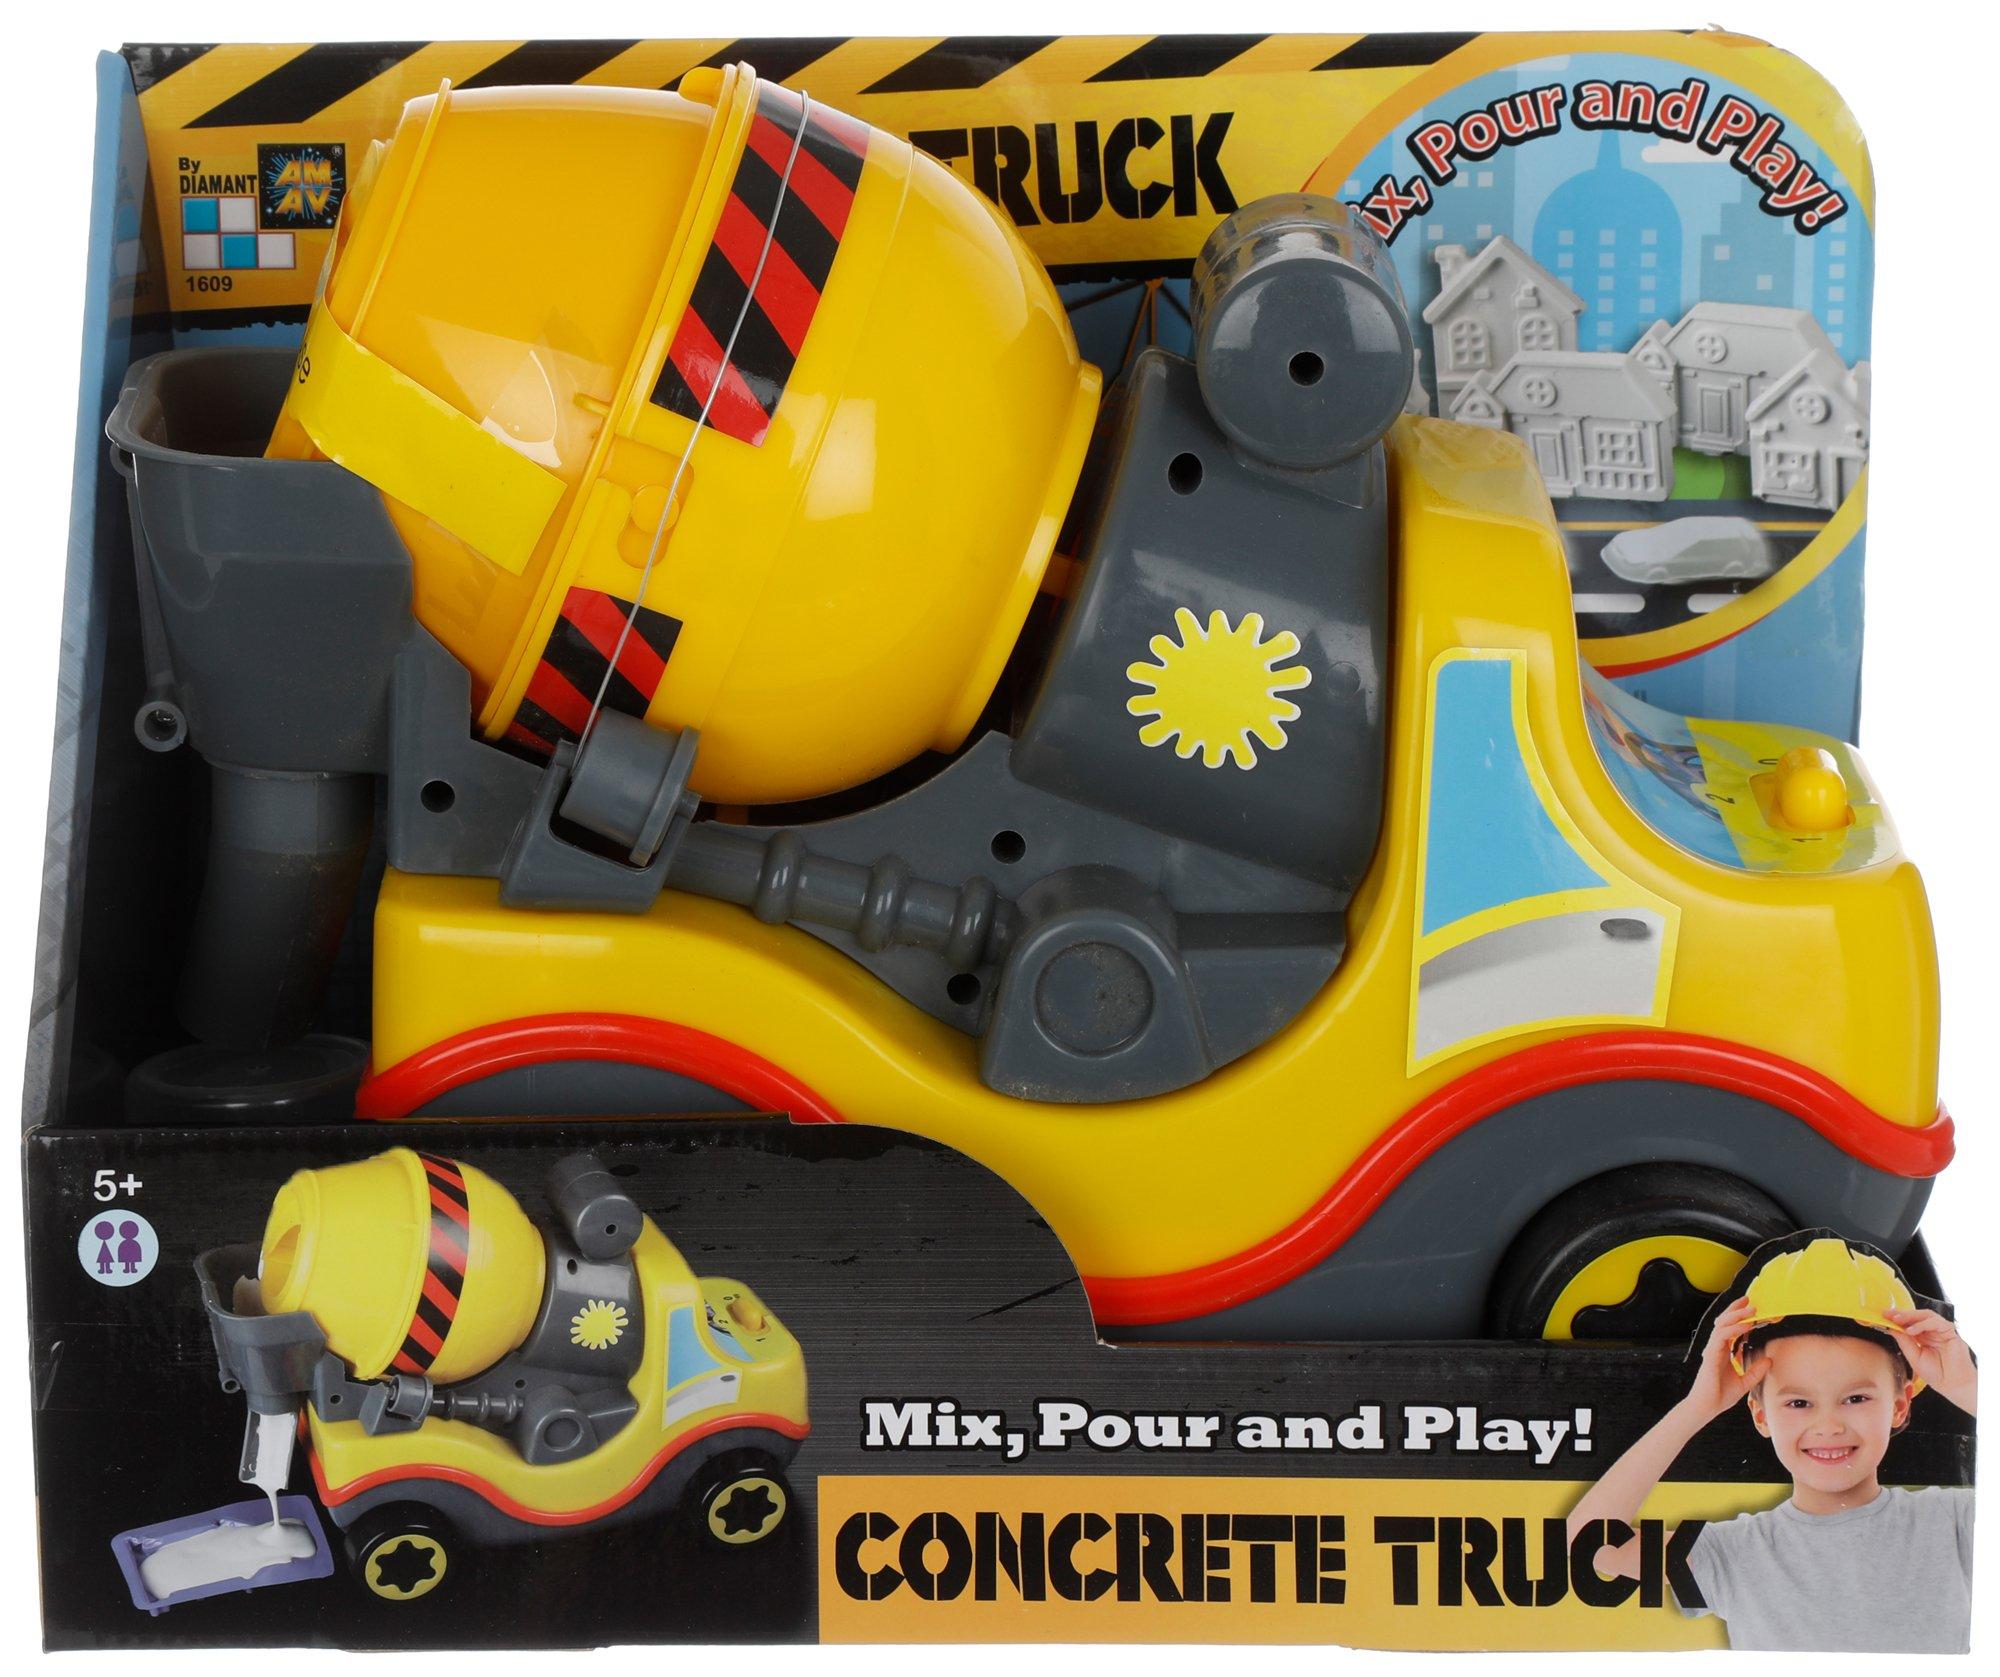 Slime Truck Toy